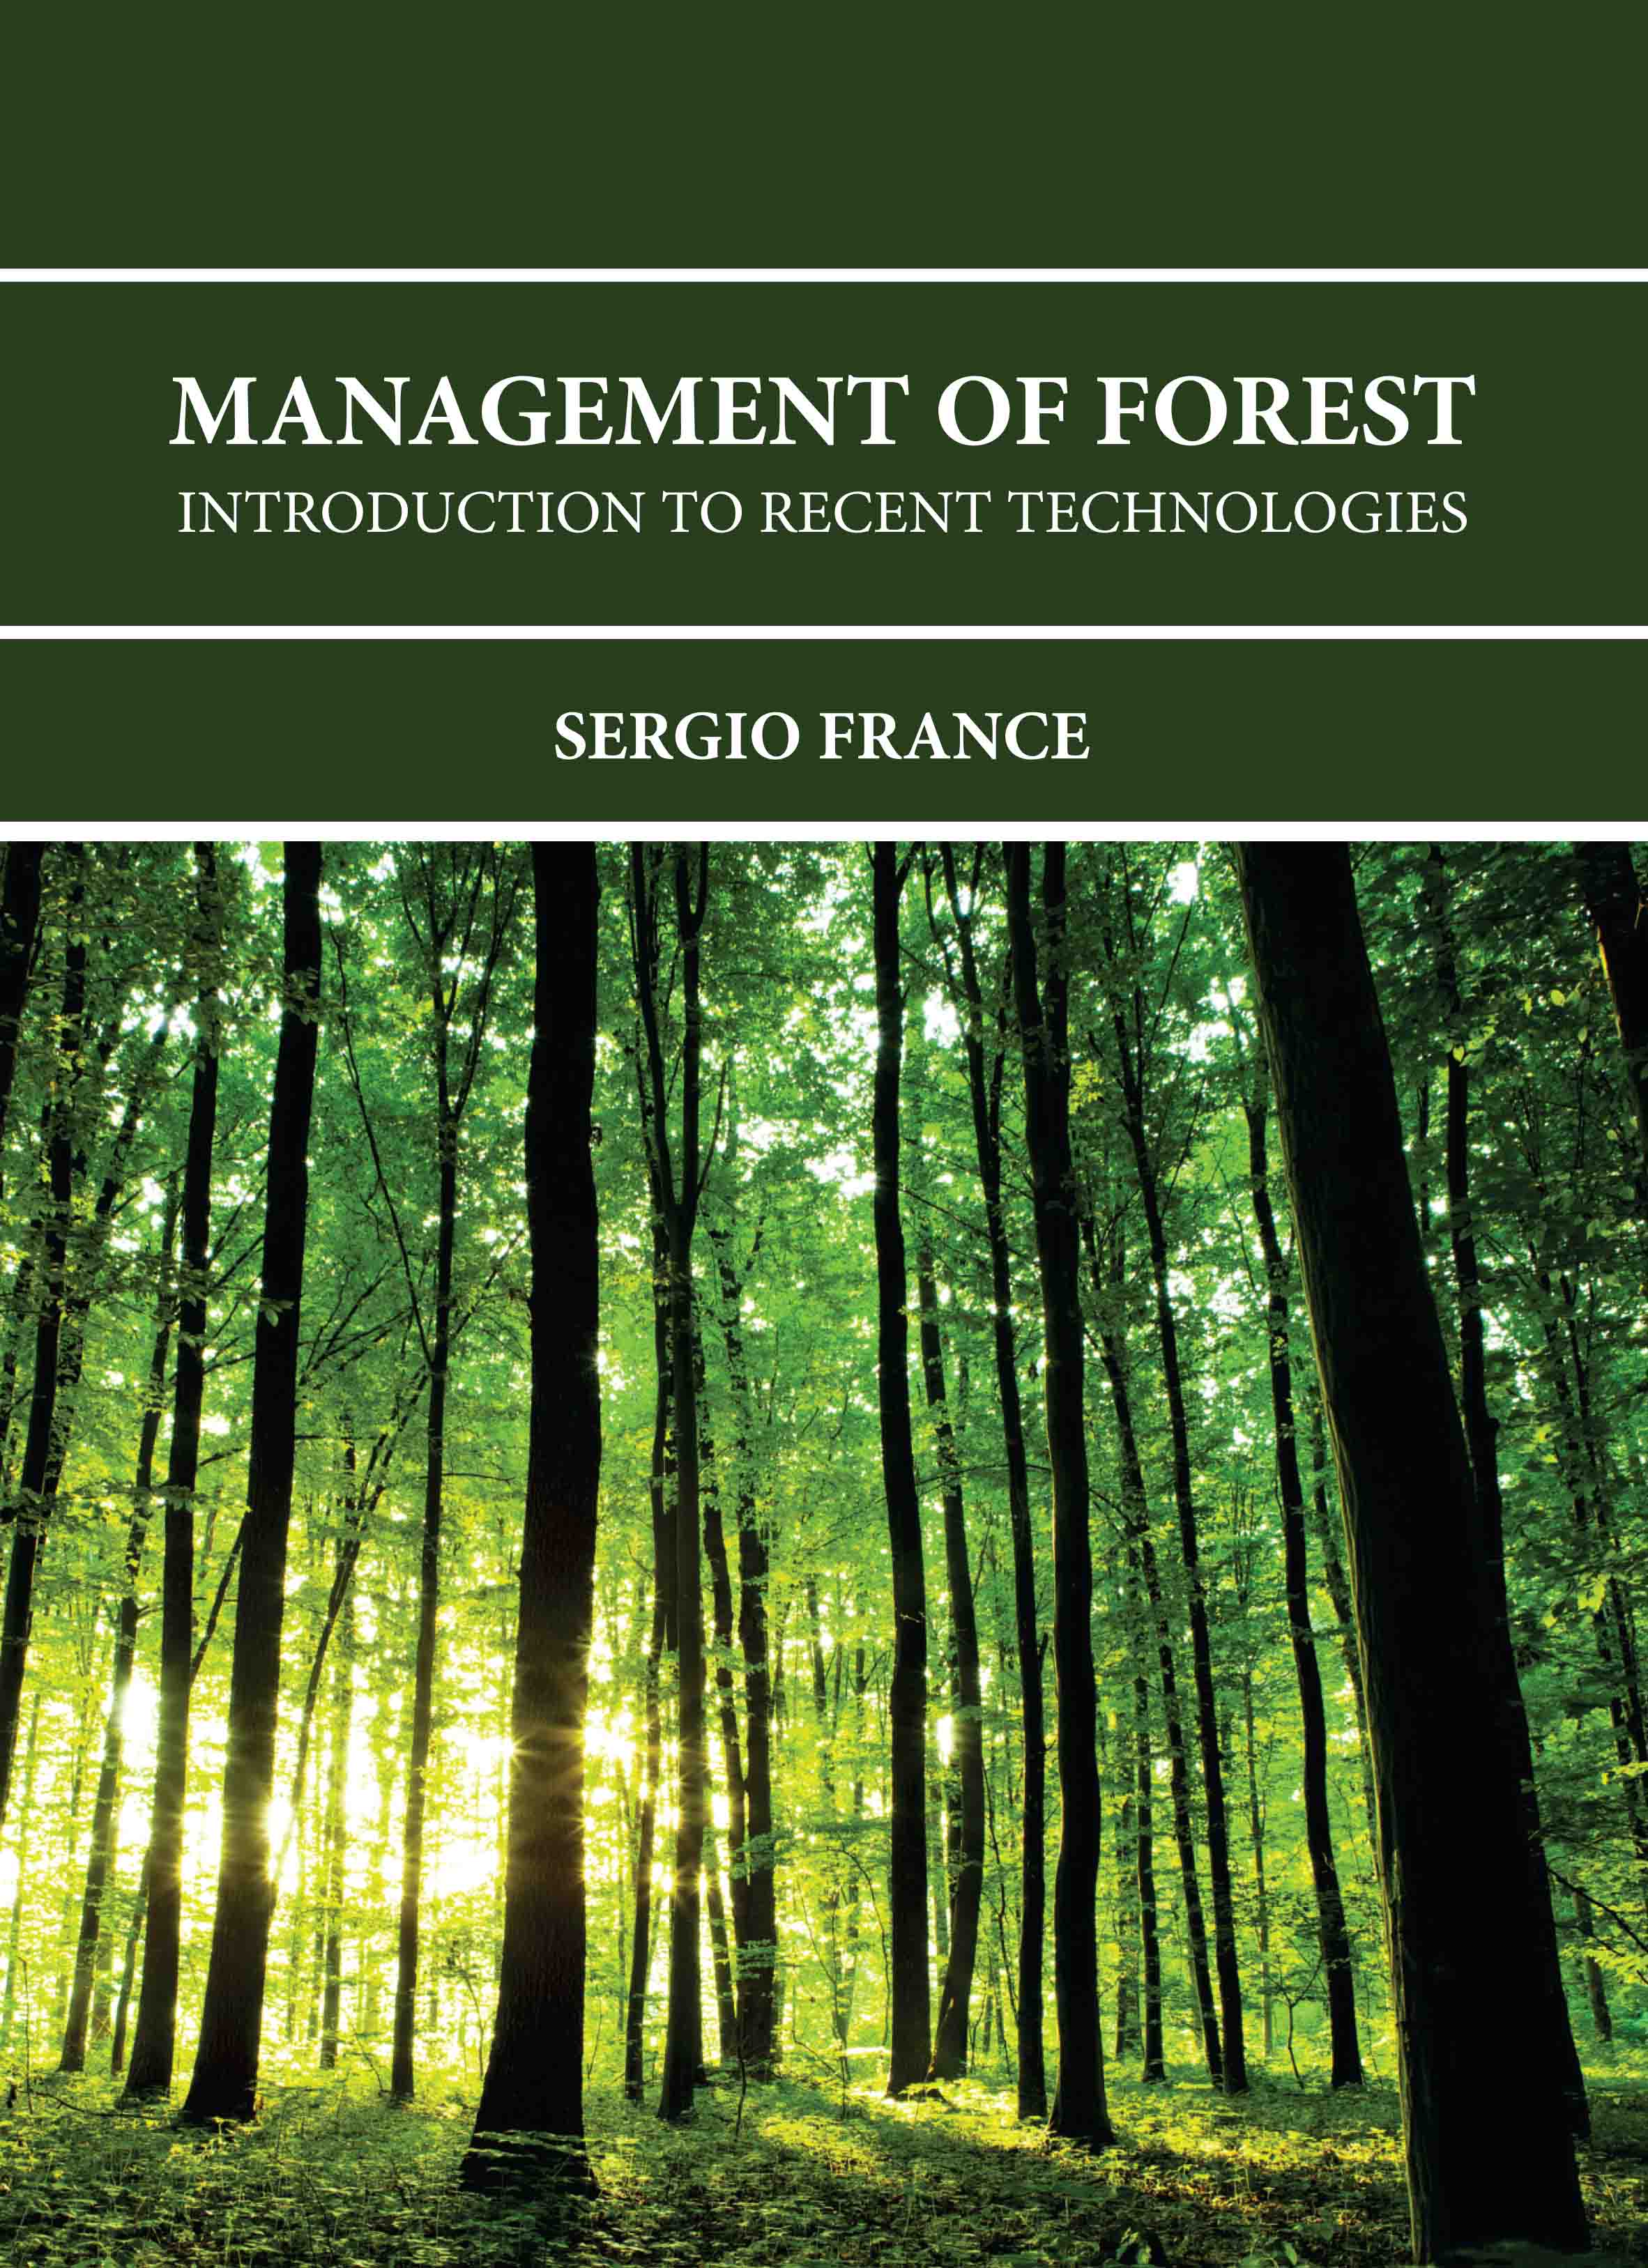 Management of Forest: Introduction to Recent Technologies